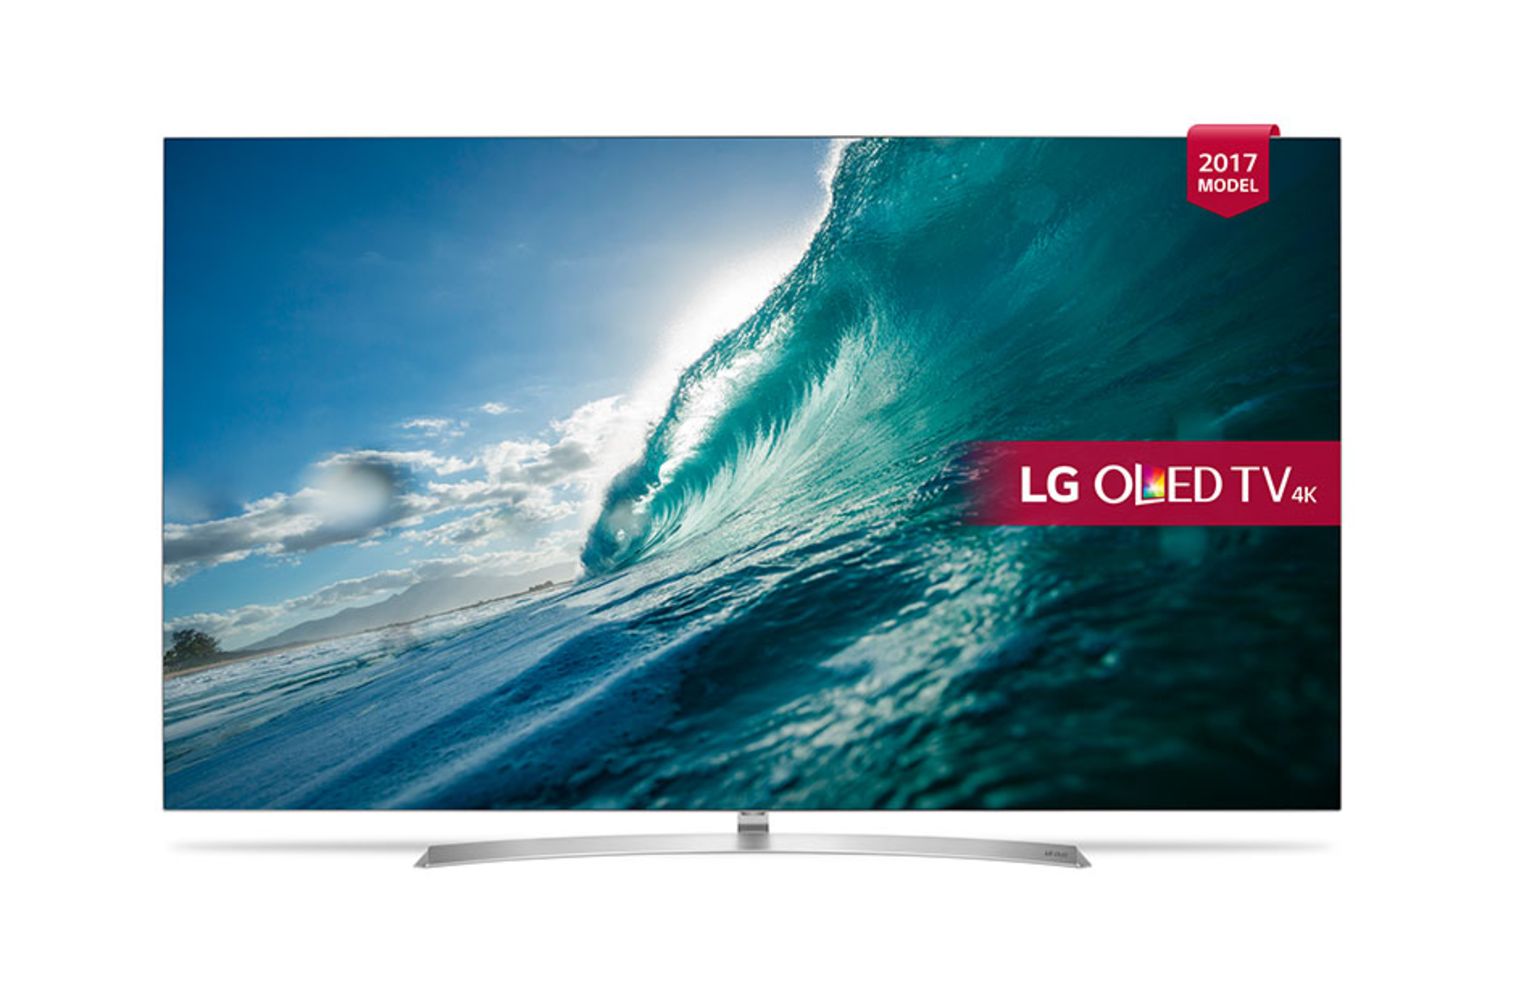 More stock just in! LG TVs & Monitors - Including 4K UHD Smart TVs up to 77", HD Monitors And Ultra-Wide Gaming Monitors